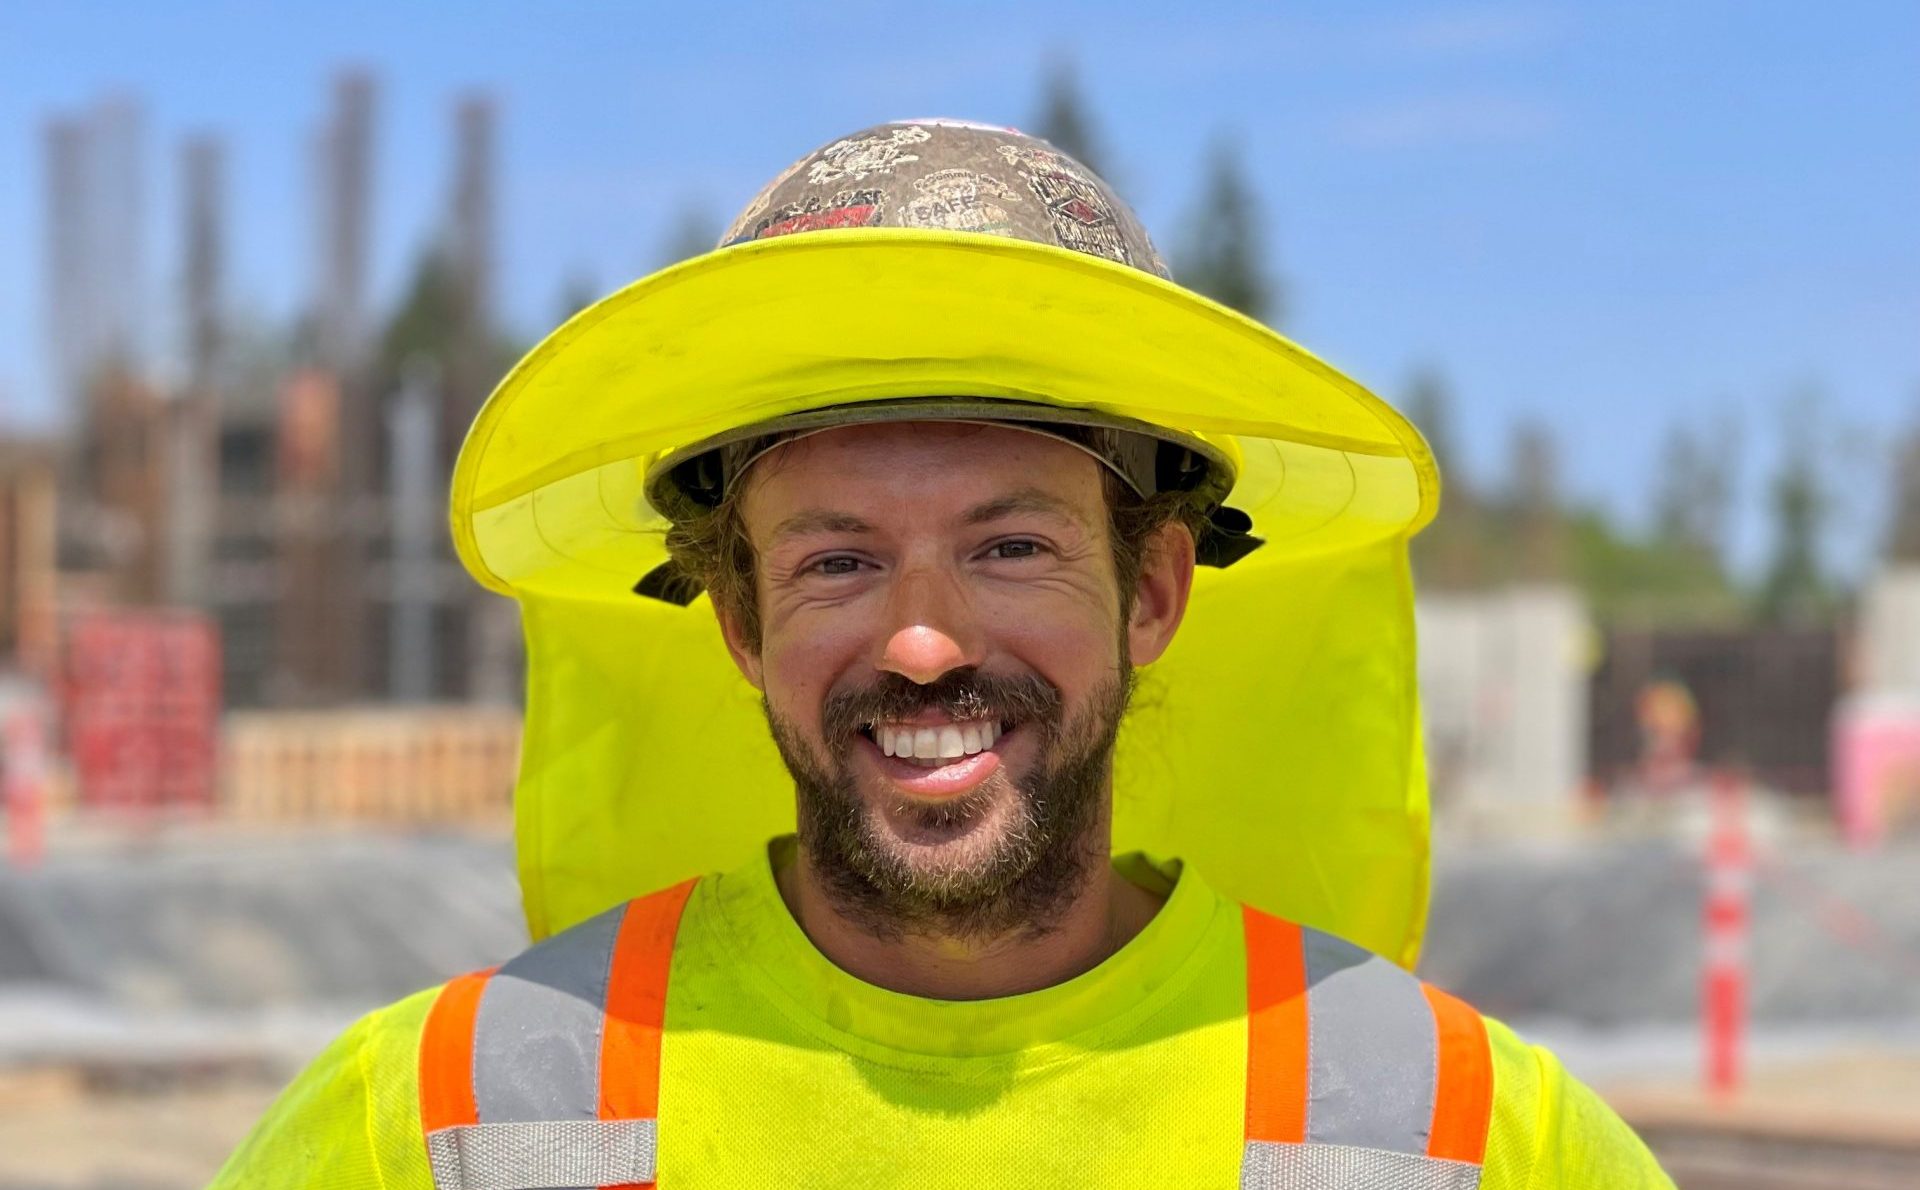 A picture of an ironworker named Brodie smiling